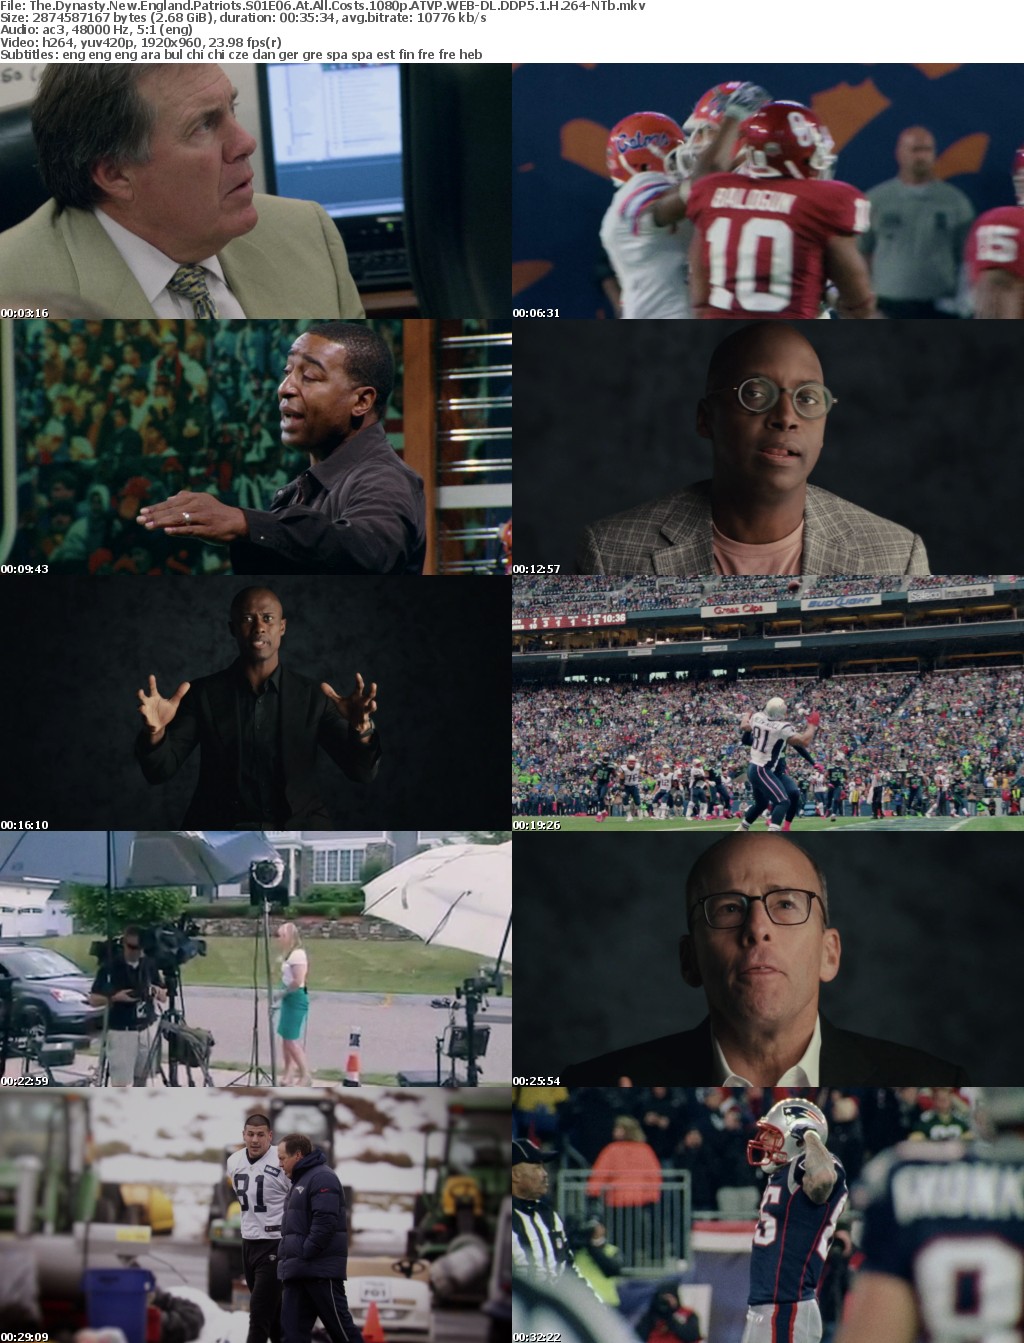 The Dynasty New England Patriots S01E06 At All Costs 1080p ATVP WEB-DL DDP5 1 H 264-NTb